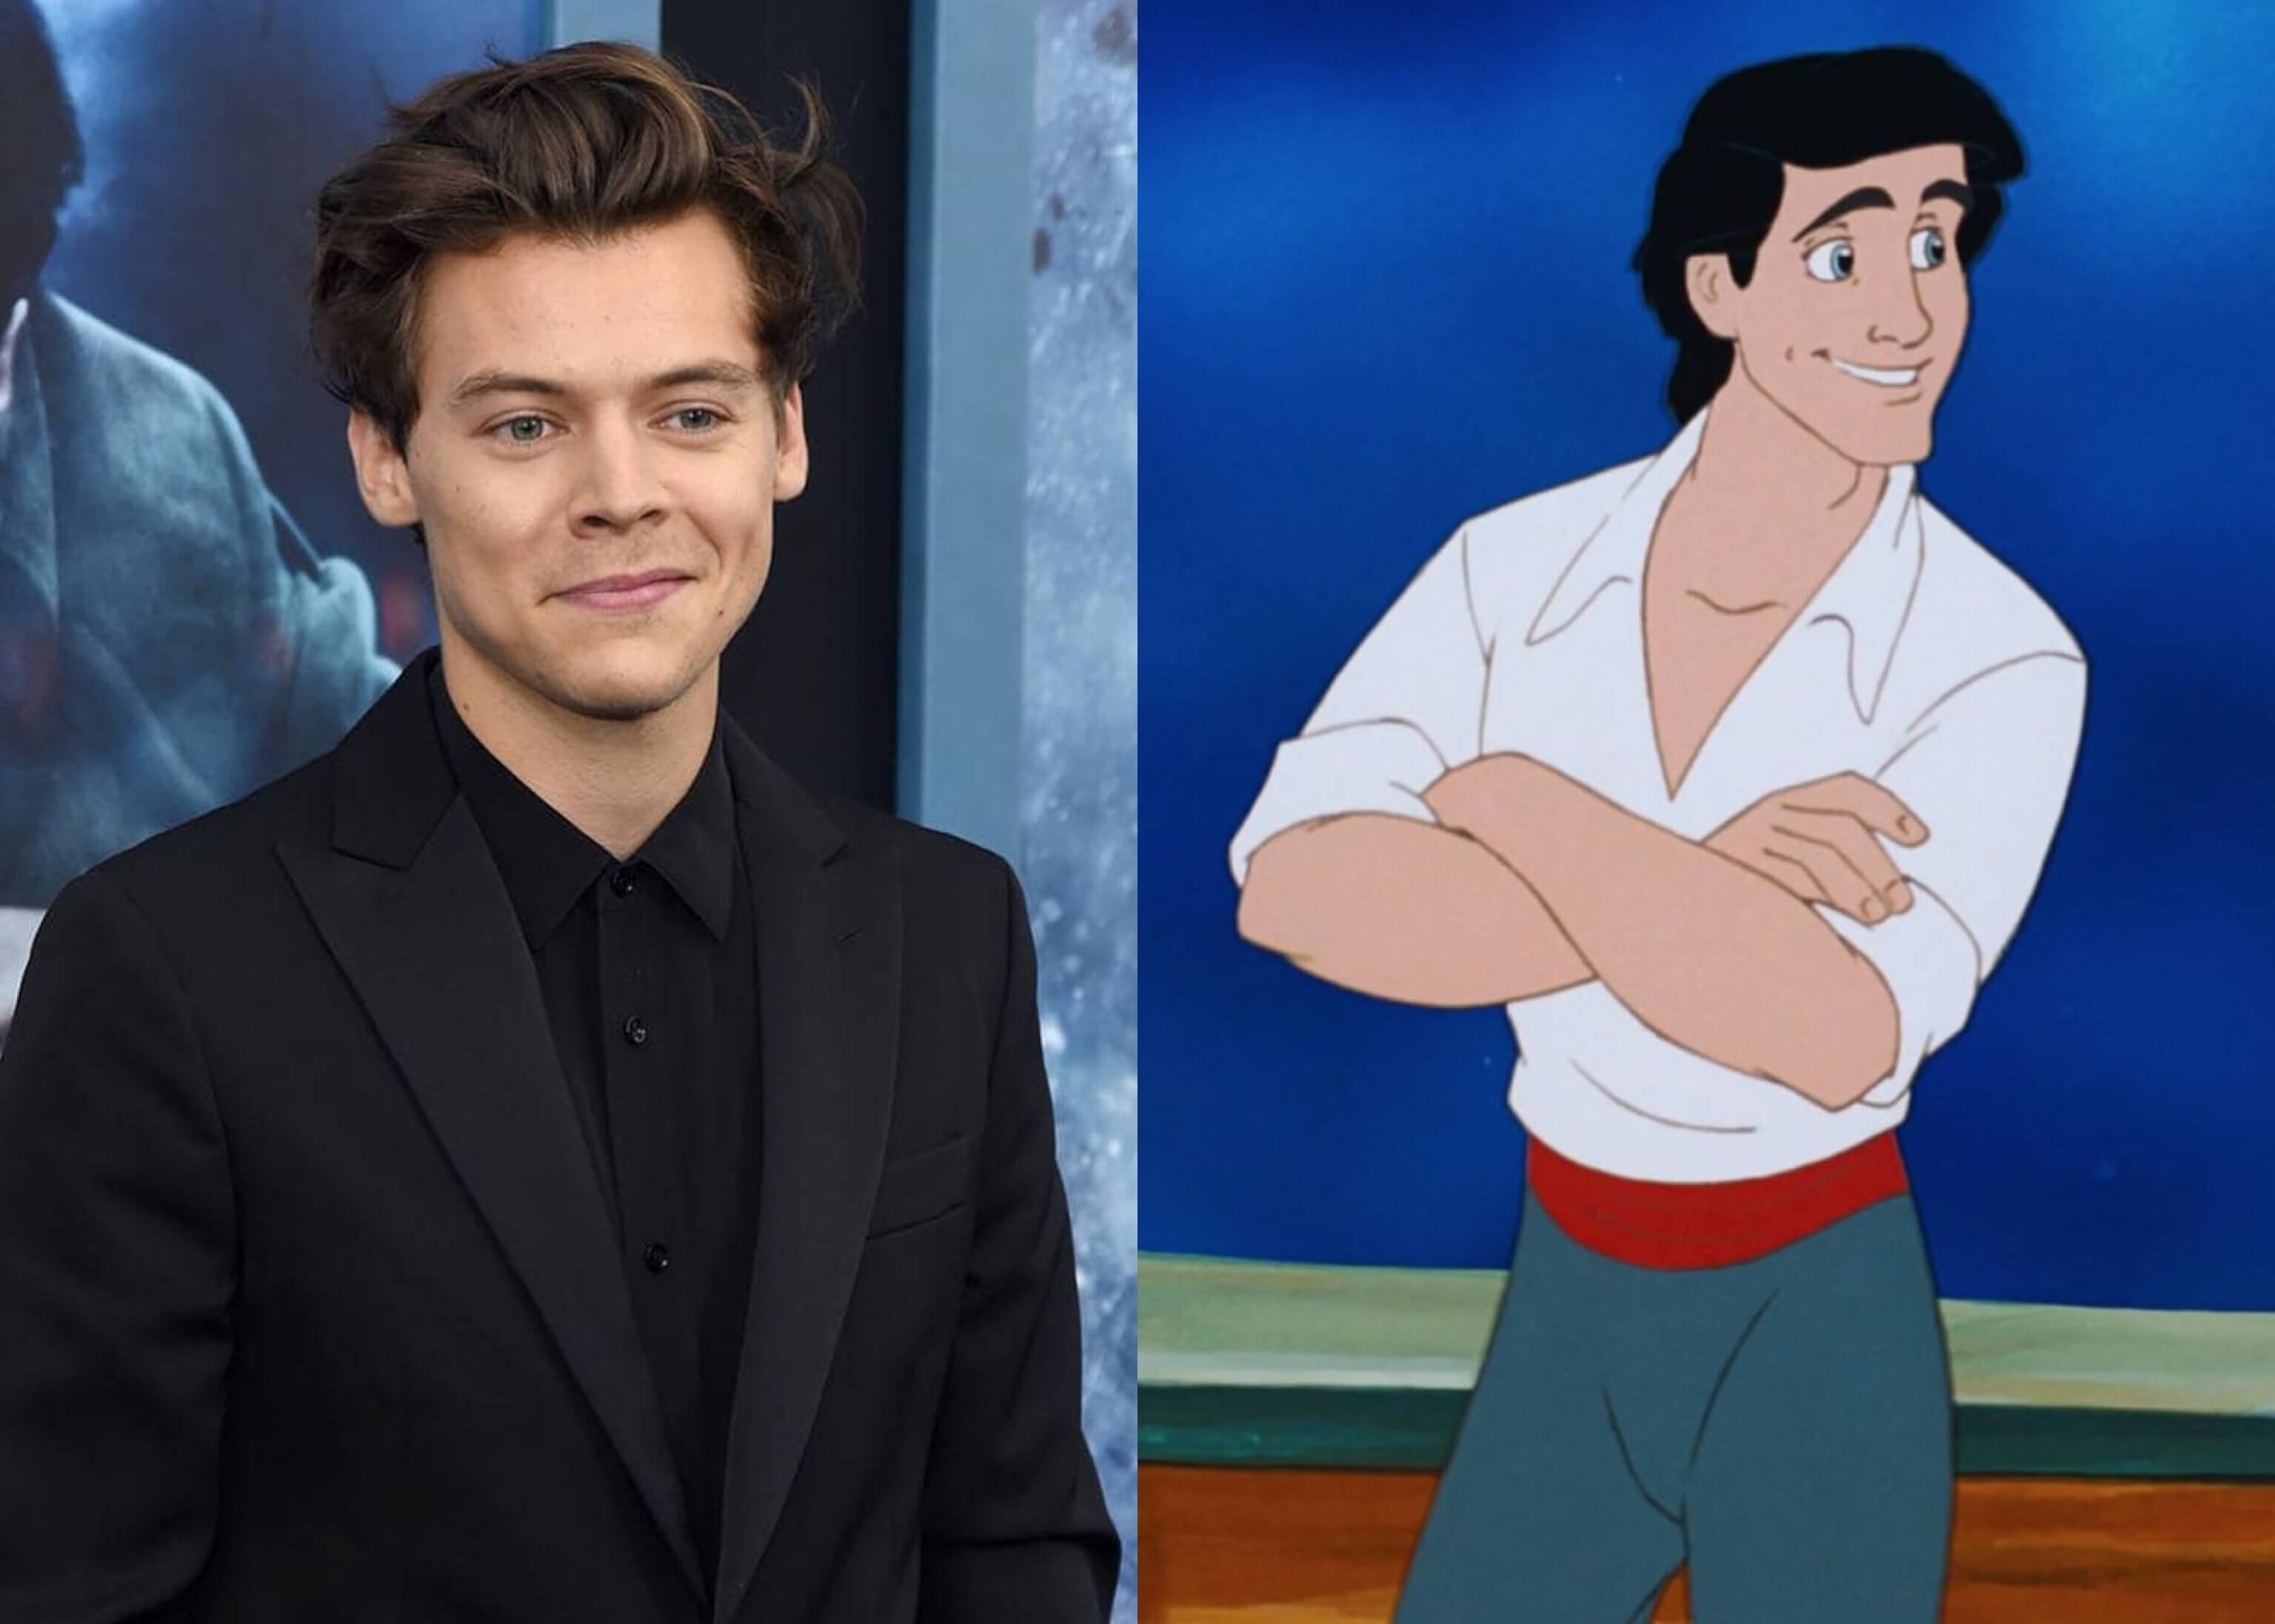 Harry Styles In Talks to Play Prince Eric in Disney’s Live Action ‘The Little Mermaid’